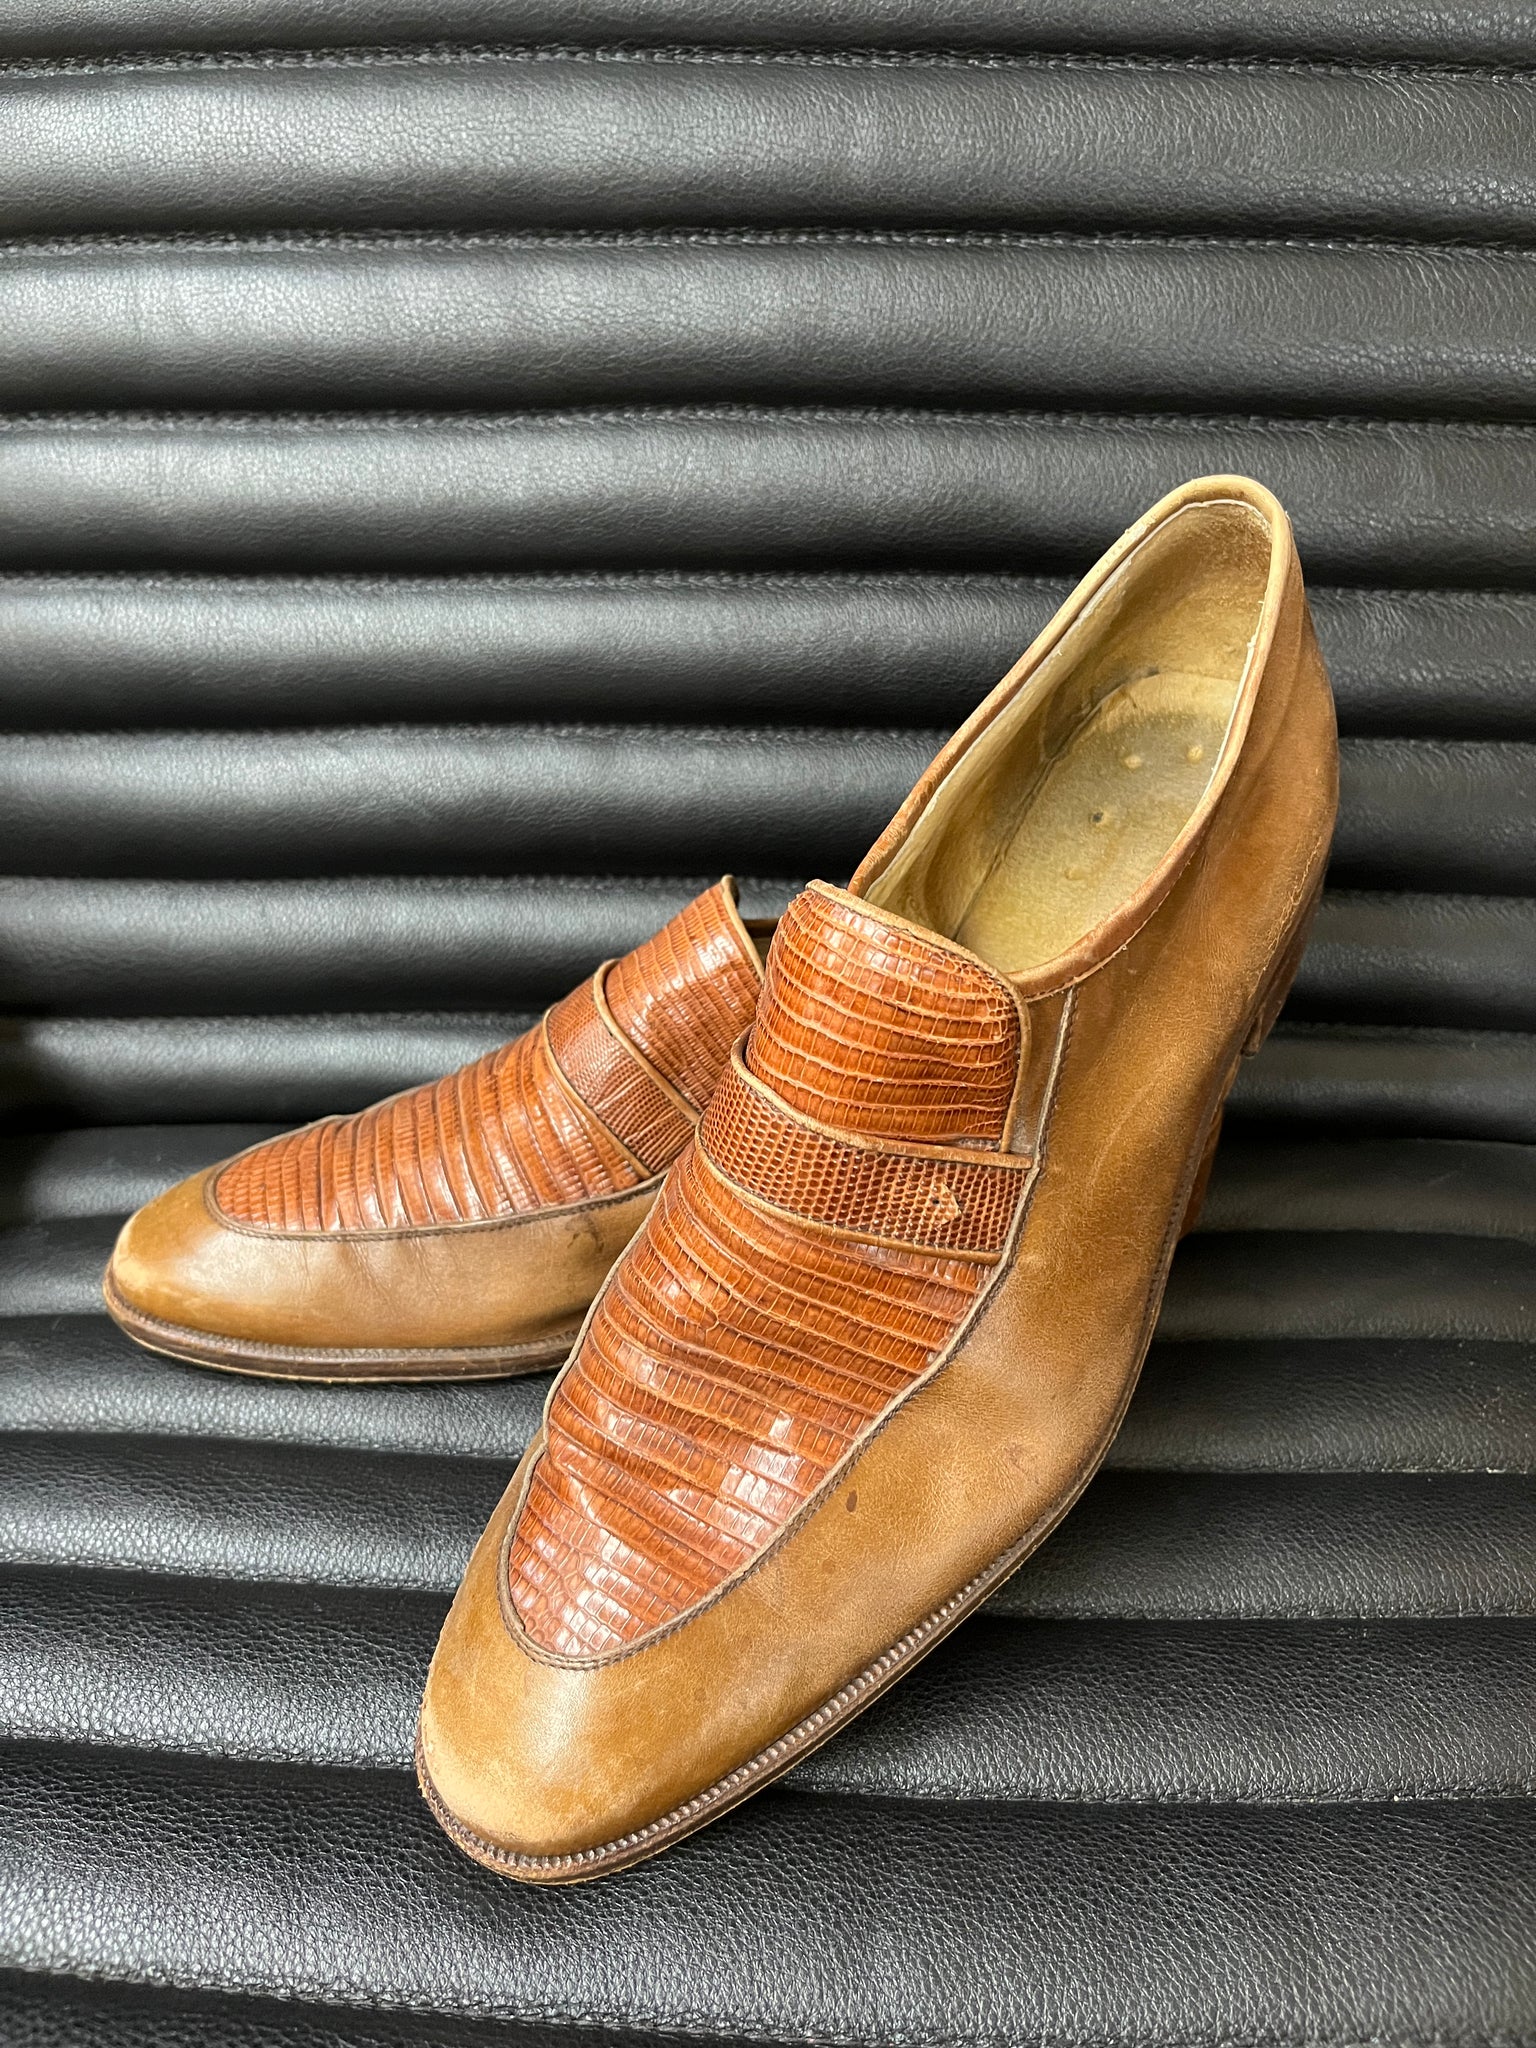 1960s MENS SHOES - Vero Cuoio- brown alligator loafers